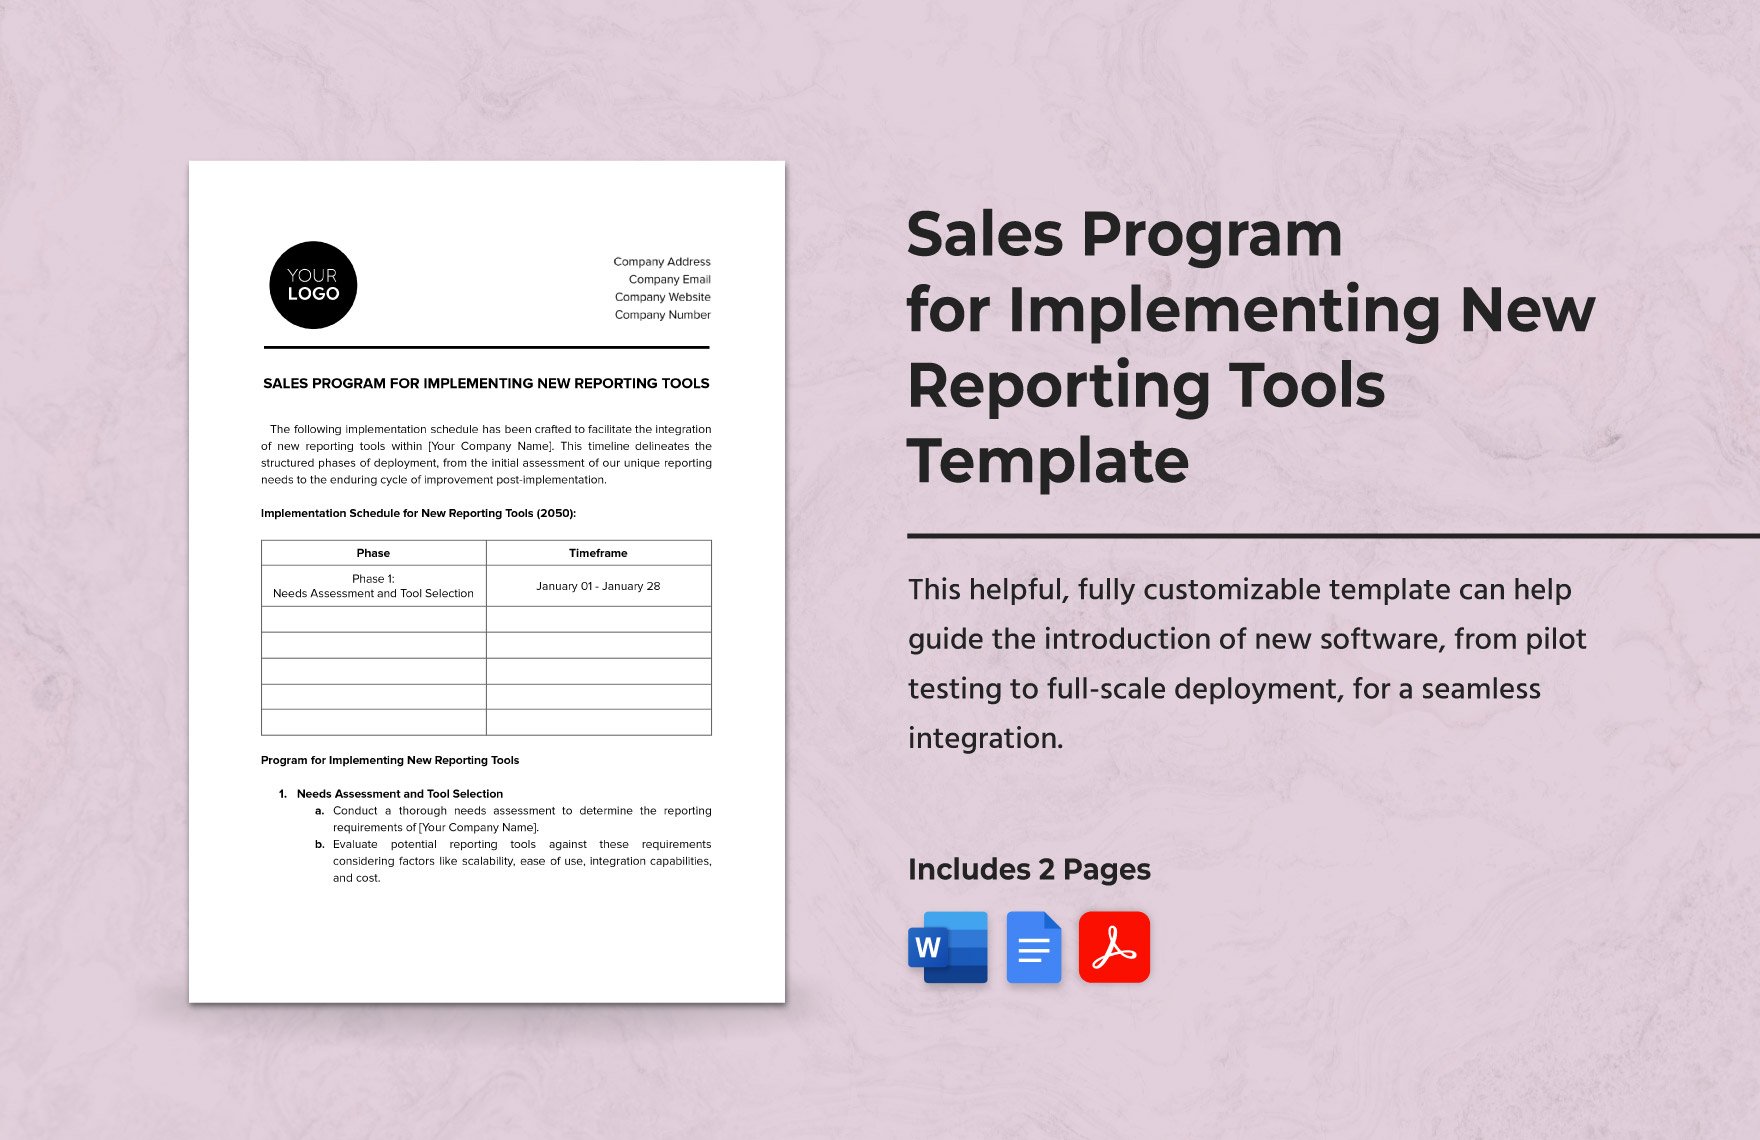 Sales Program for Implementing New Reporting Tools Template